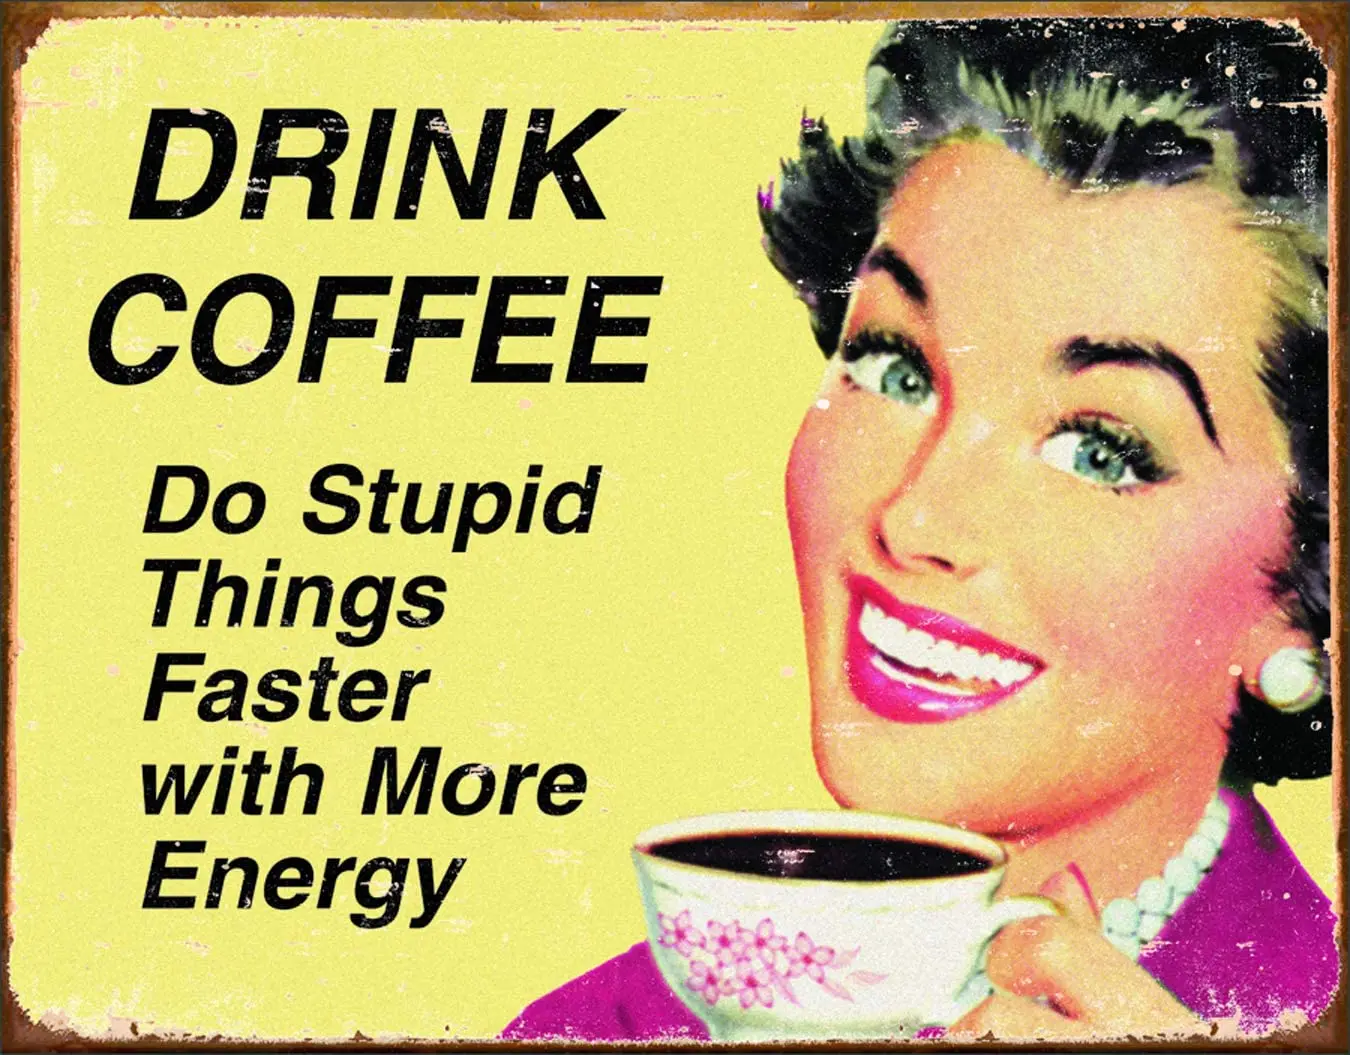 

Desperate Enterprises Ephemera - Drink Coffee Do Stupid Things Faster with More Energy Tin Sign, 16" W x 12.5" H